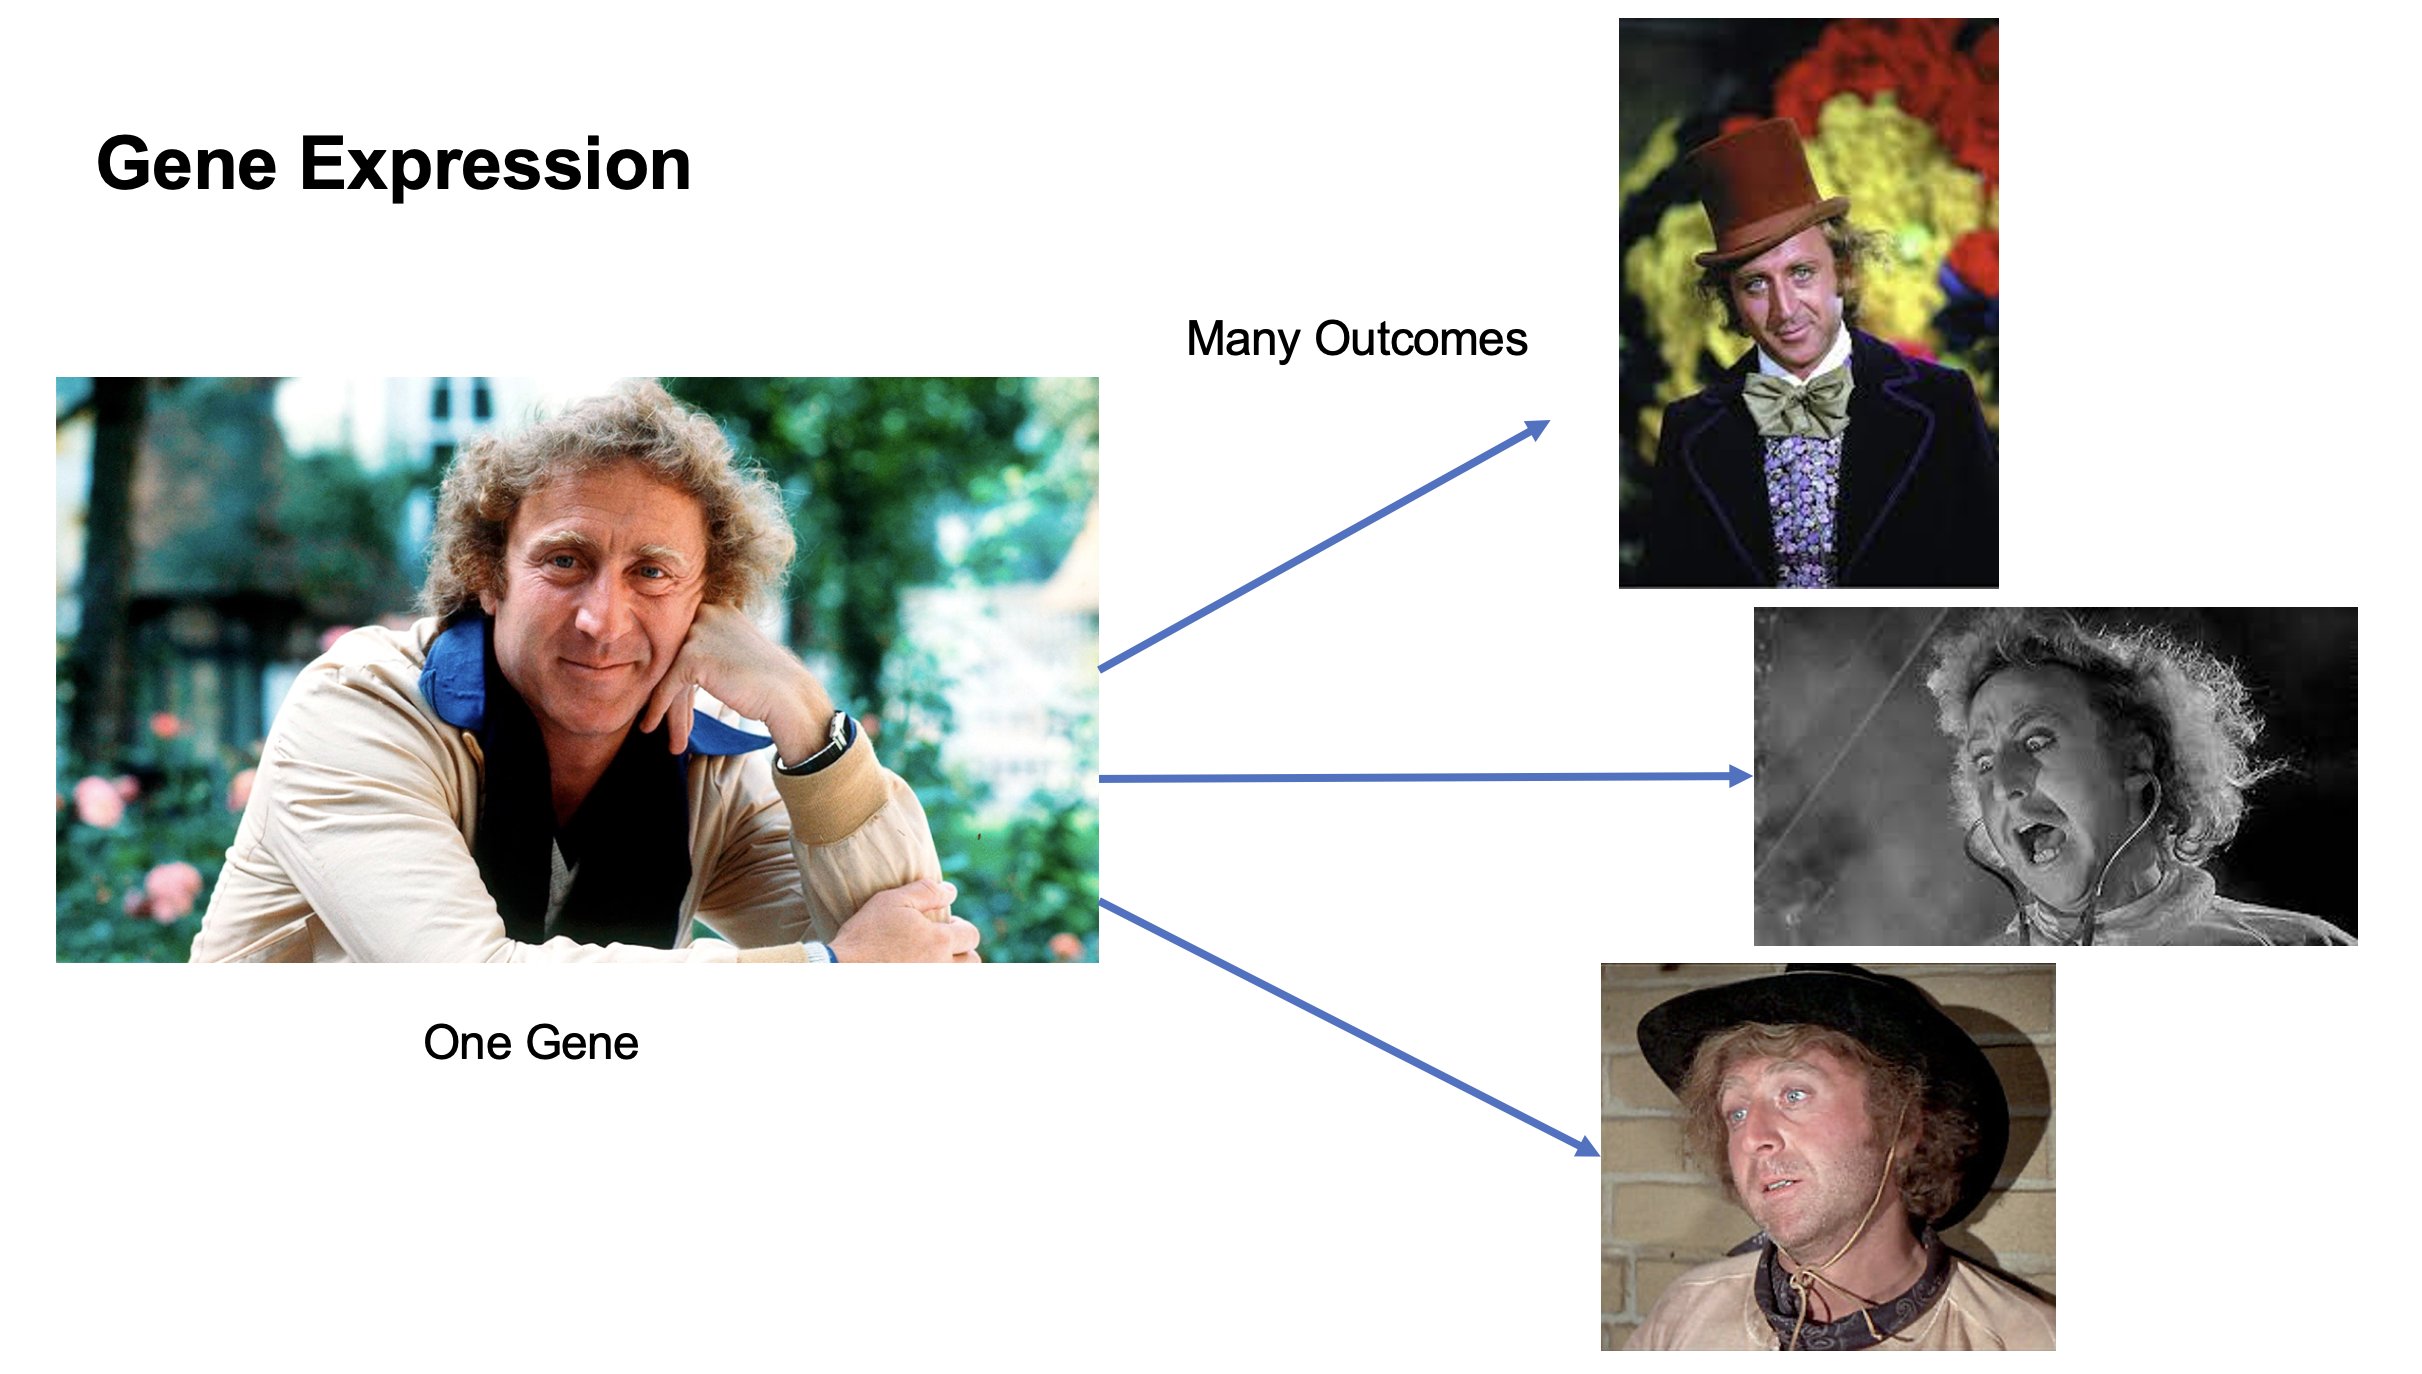 A slide labeled 'Gene Expression'. The main image a casual shot of actor Gene Wilder, labeled 'One Gene'. There a three side images of Wilder as iconic characters he played in 'Willy Wonka & the Chocolate Factory', 'Young Frankenstein', and 'Blazing Saddles'. There are arrows from the main image to the three side images, labeled 'Many Outcomes'.